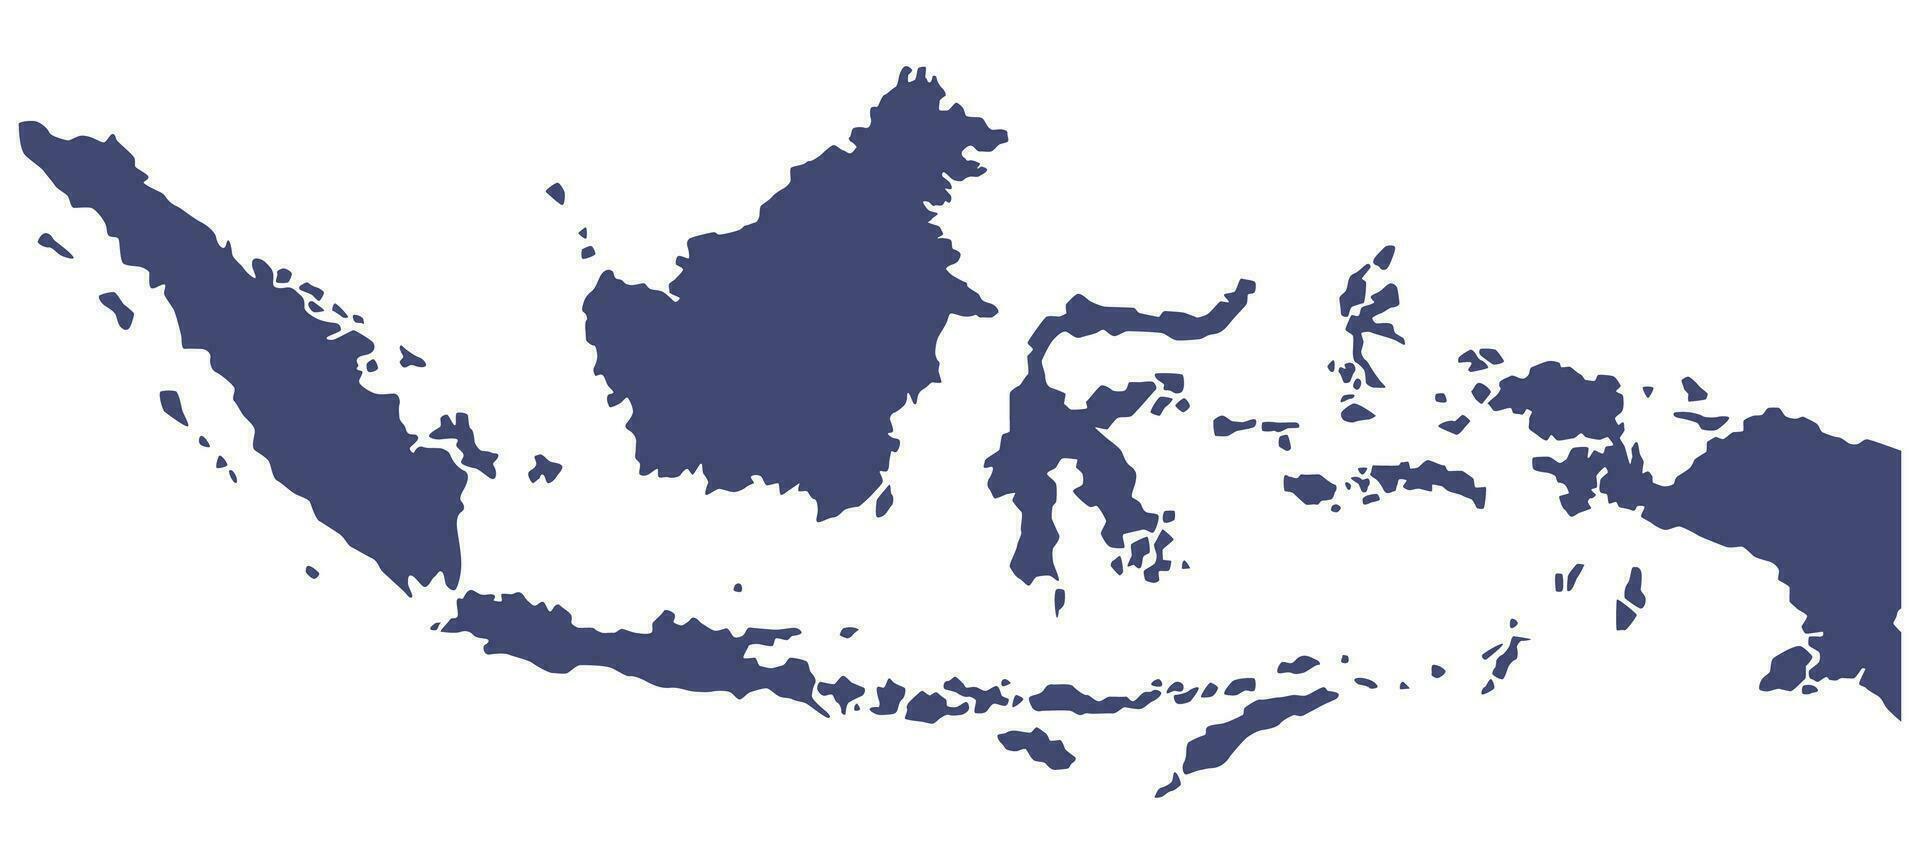 Indonesia map vector isolated on white background.